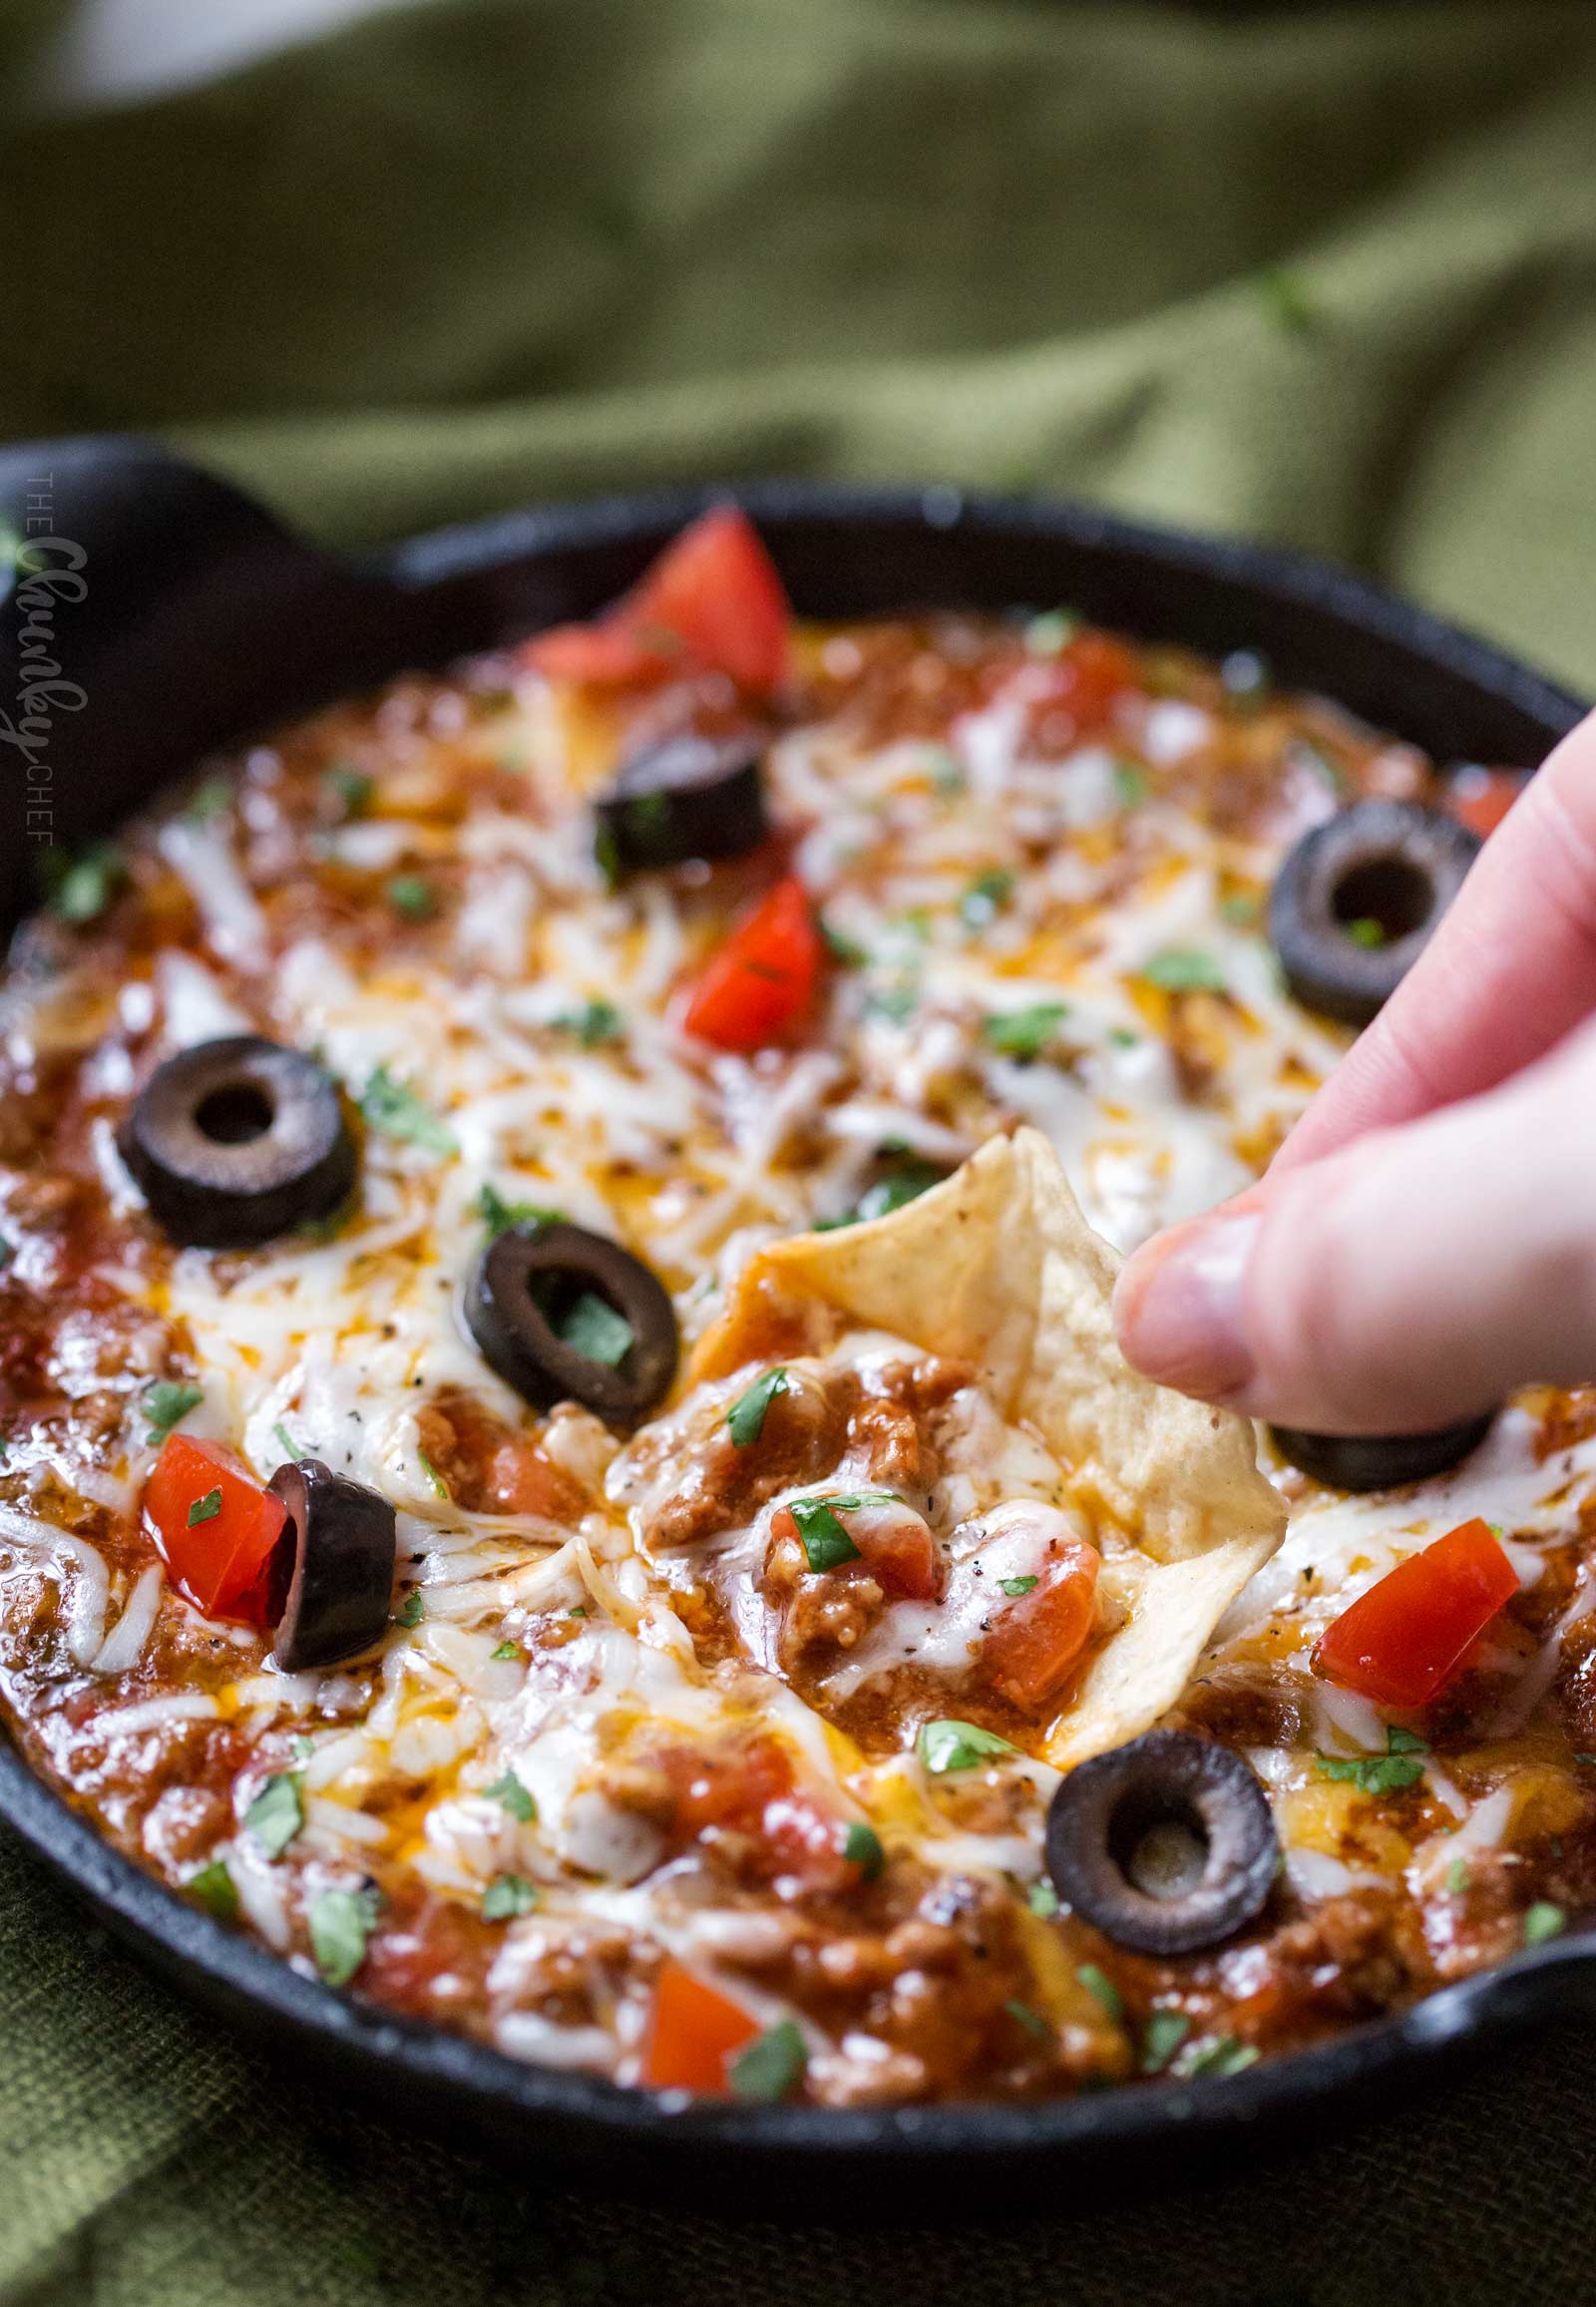 https://www.thechunkychef.com/wp-content/uploads/2018/01/Ultimate-Slow-Cooker-Taco-Dip-5.jpg